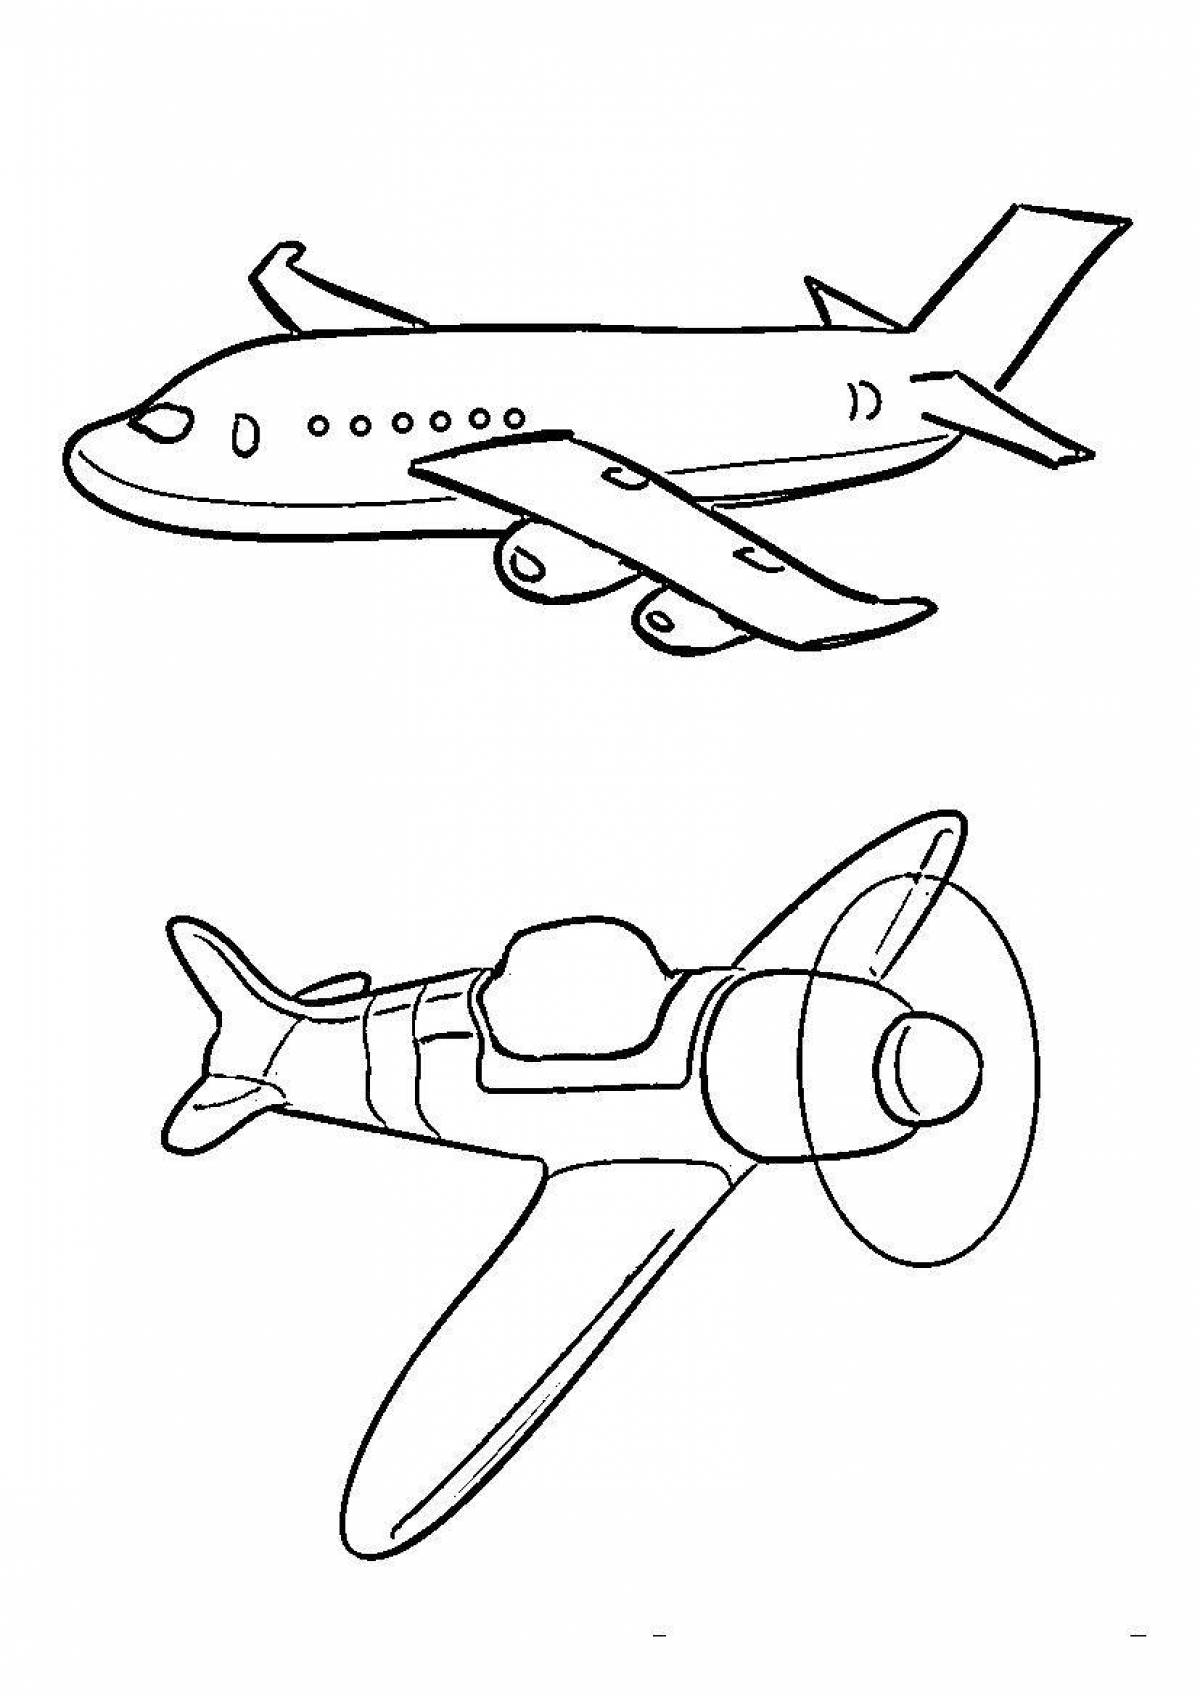 A playful airplane coloring page for 6-7 year olds